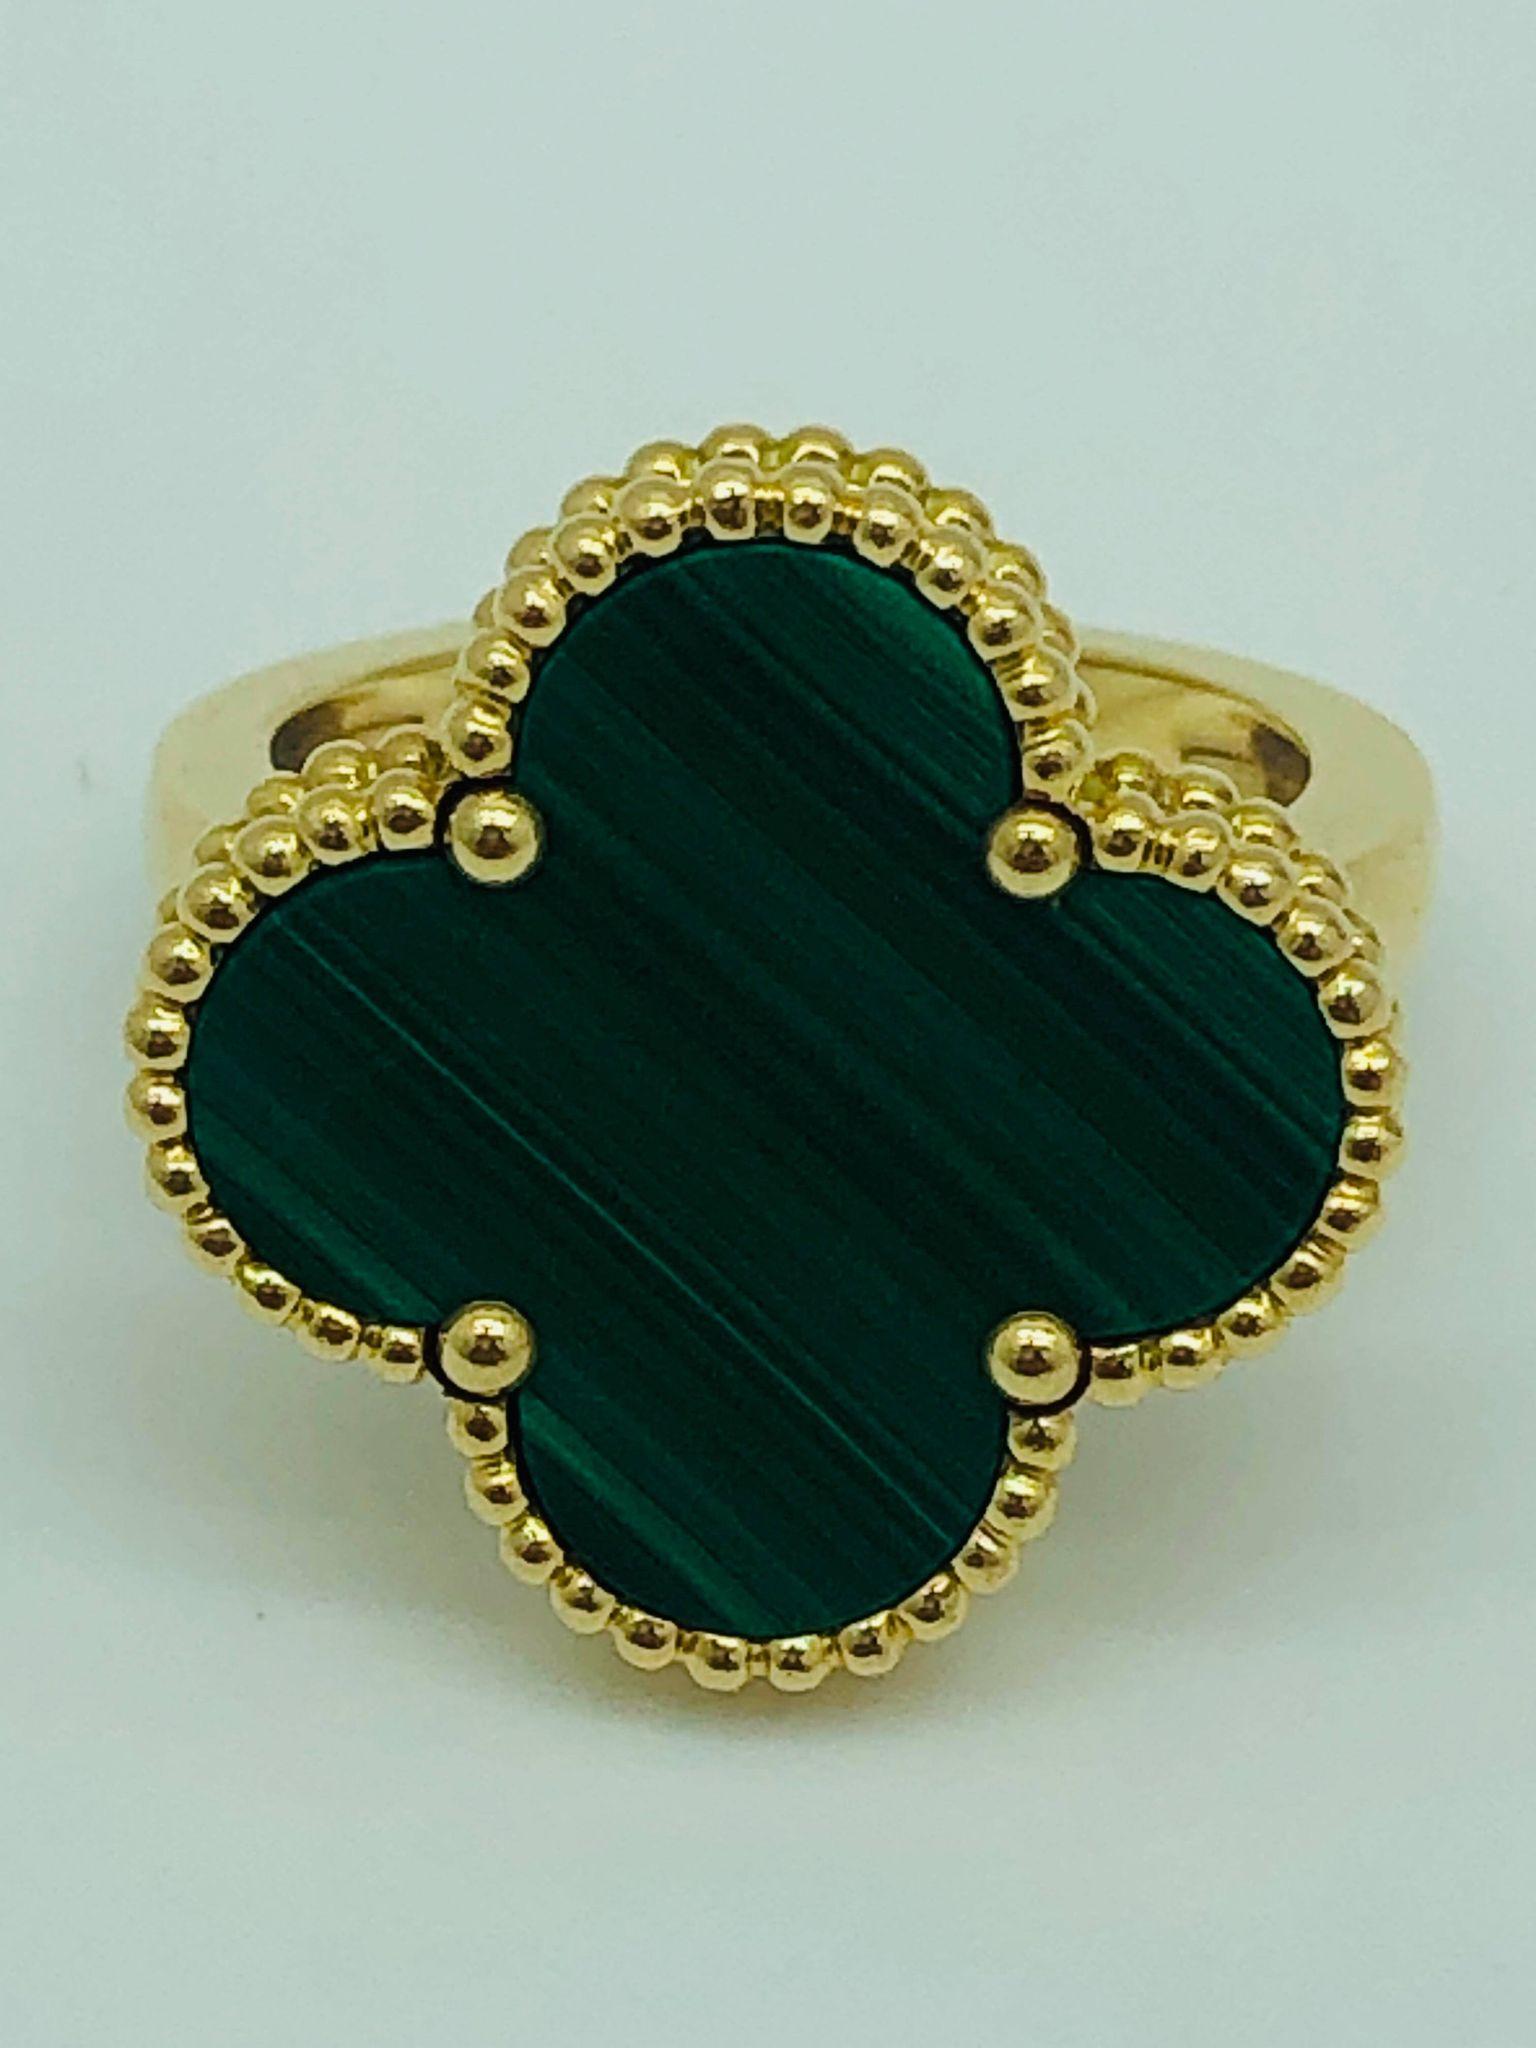 Beautiful Van Cleef and Arpels Magic Alhambra ring for sale in Malachite and 18ct gold. A size 55 which has been used and does have a few feint scratches on the gold and the stone.

MEASUREMENTS:
18ct Yellow Gold
Malachite Alhambra

INCLUDES:
Box,